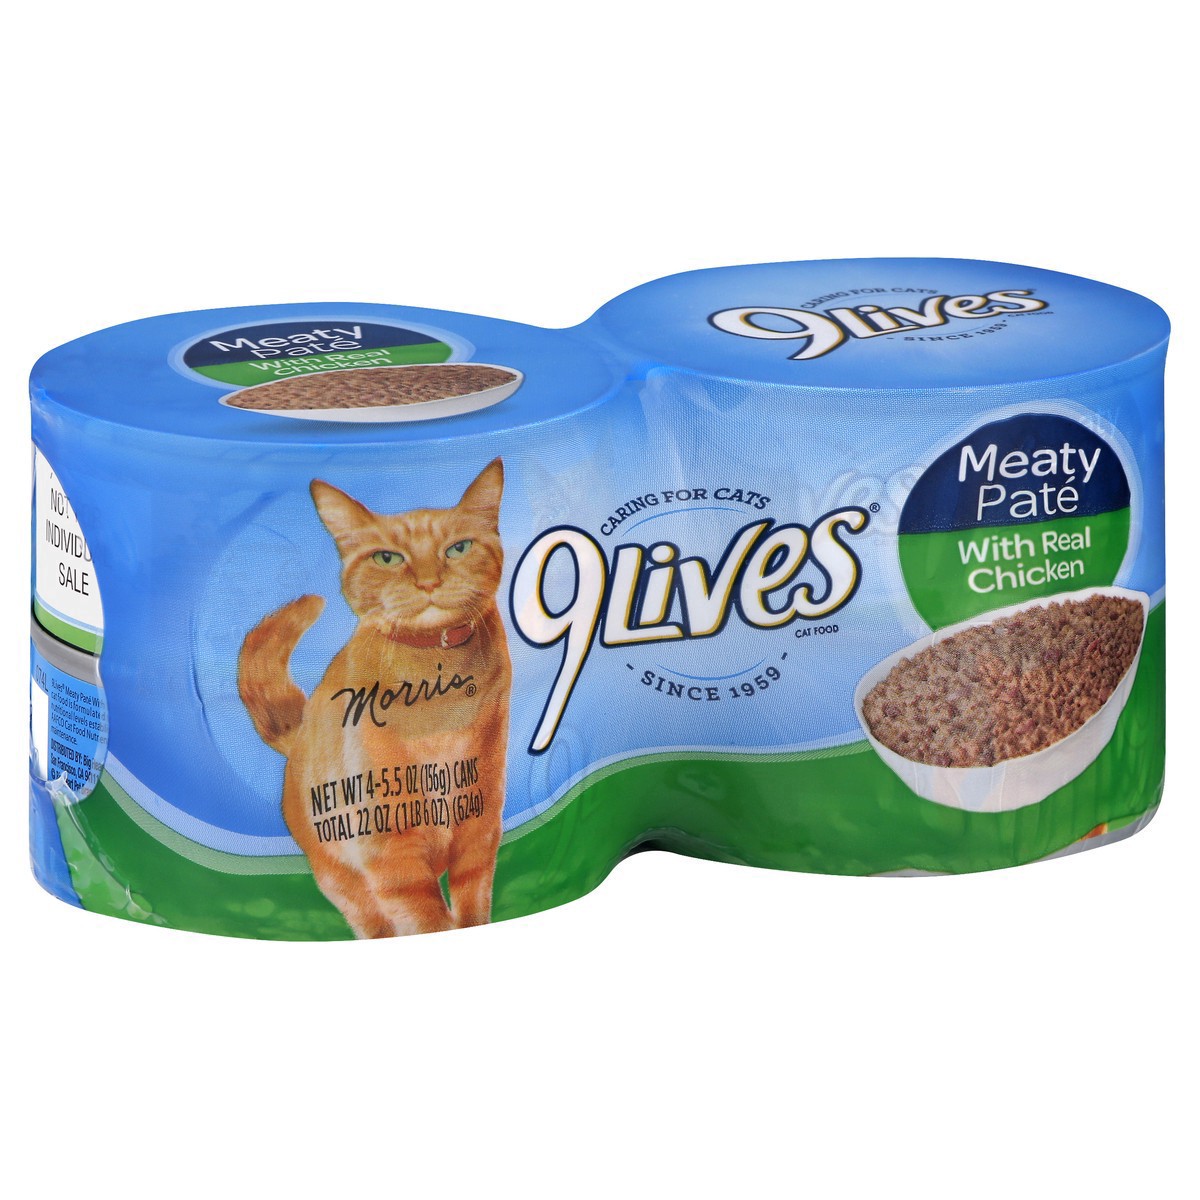 slide 3 of 10, 9Lives Cat Food, Meaty Paté w/ Real Chicken, 5.5 oz, 4 ct